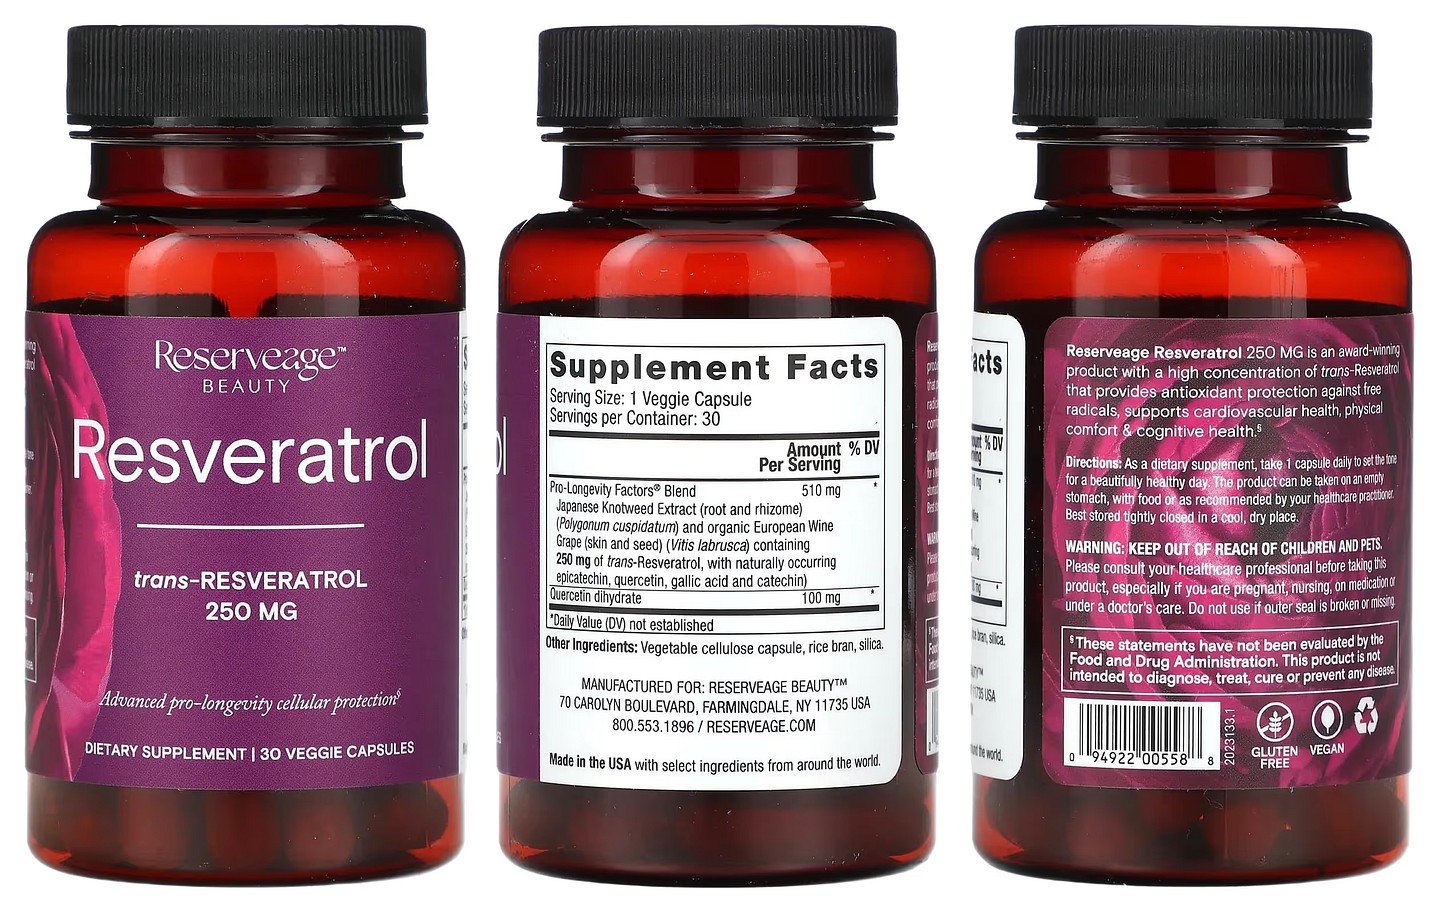 Reserveage Nutrition, Resveratrol packaging